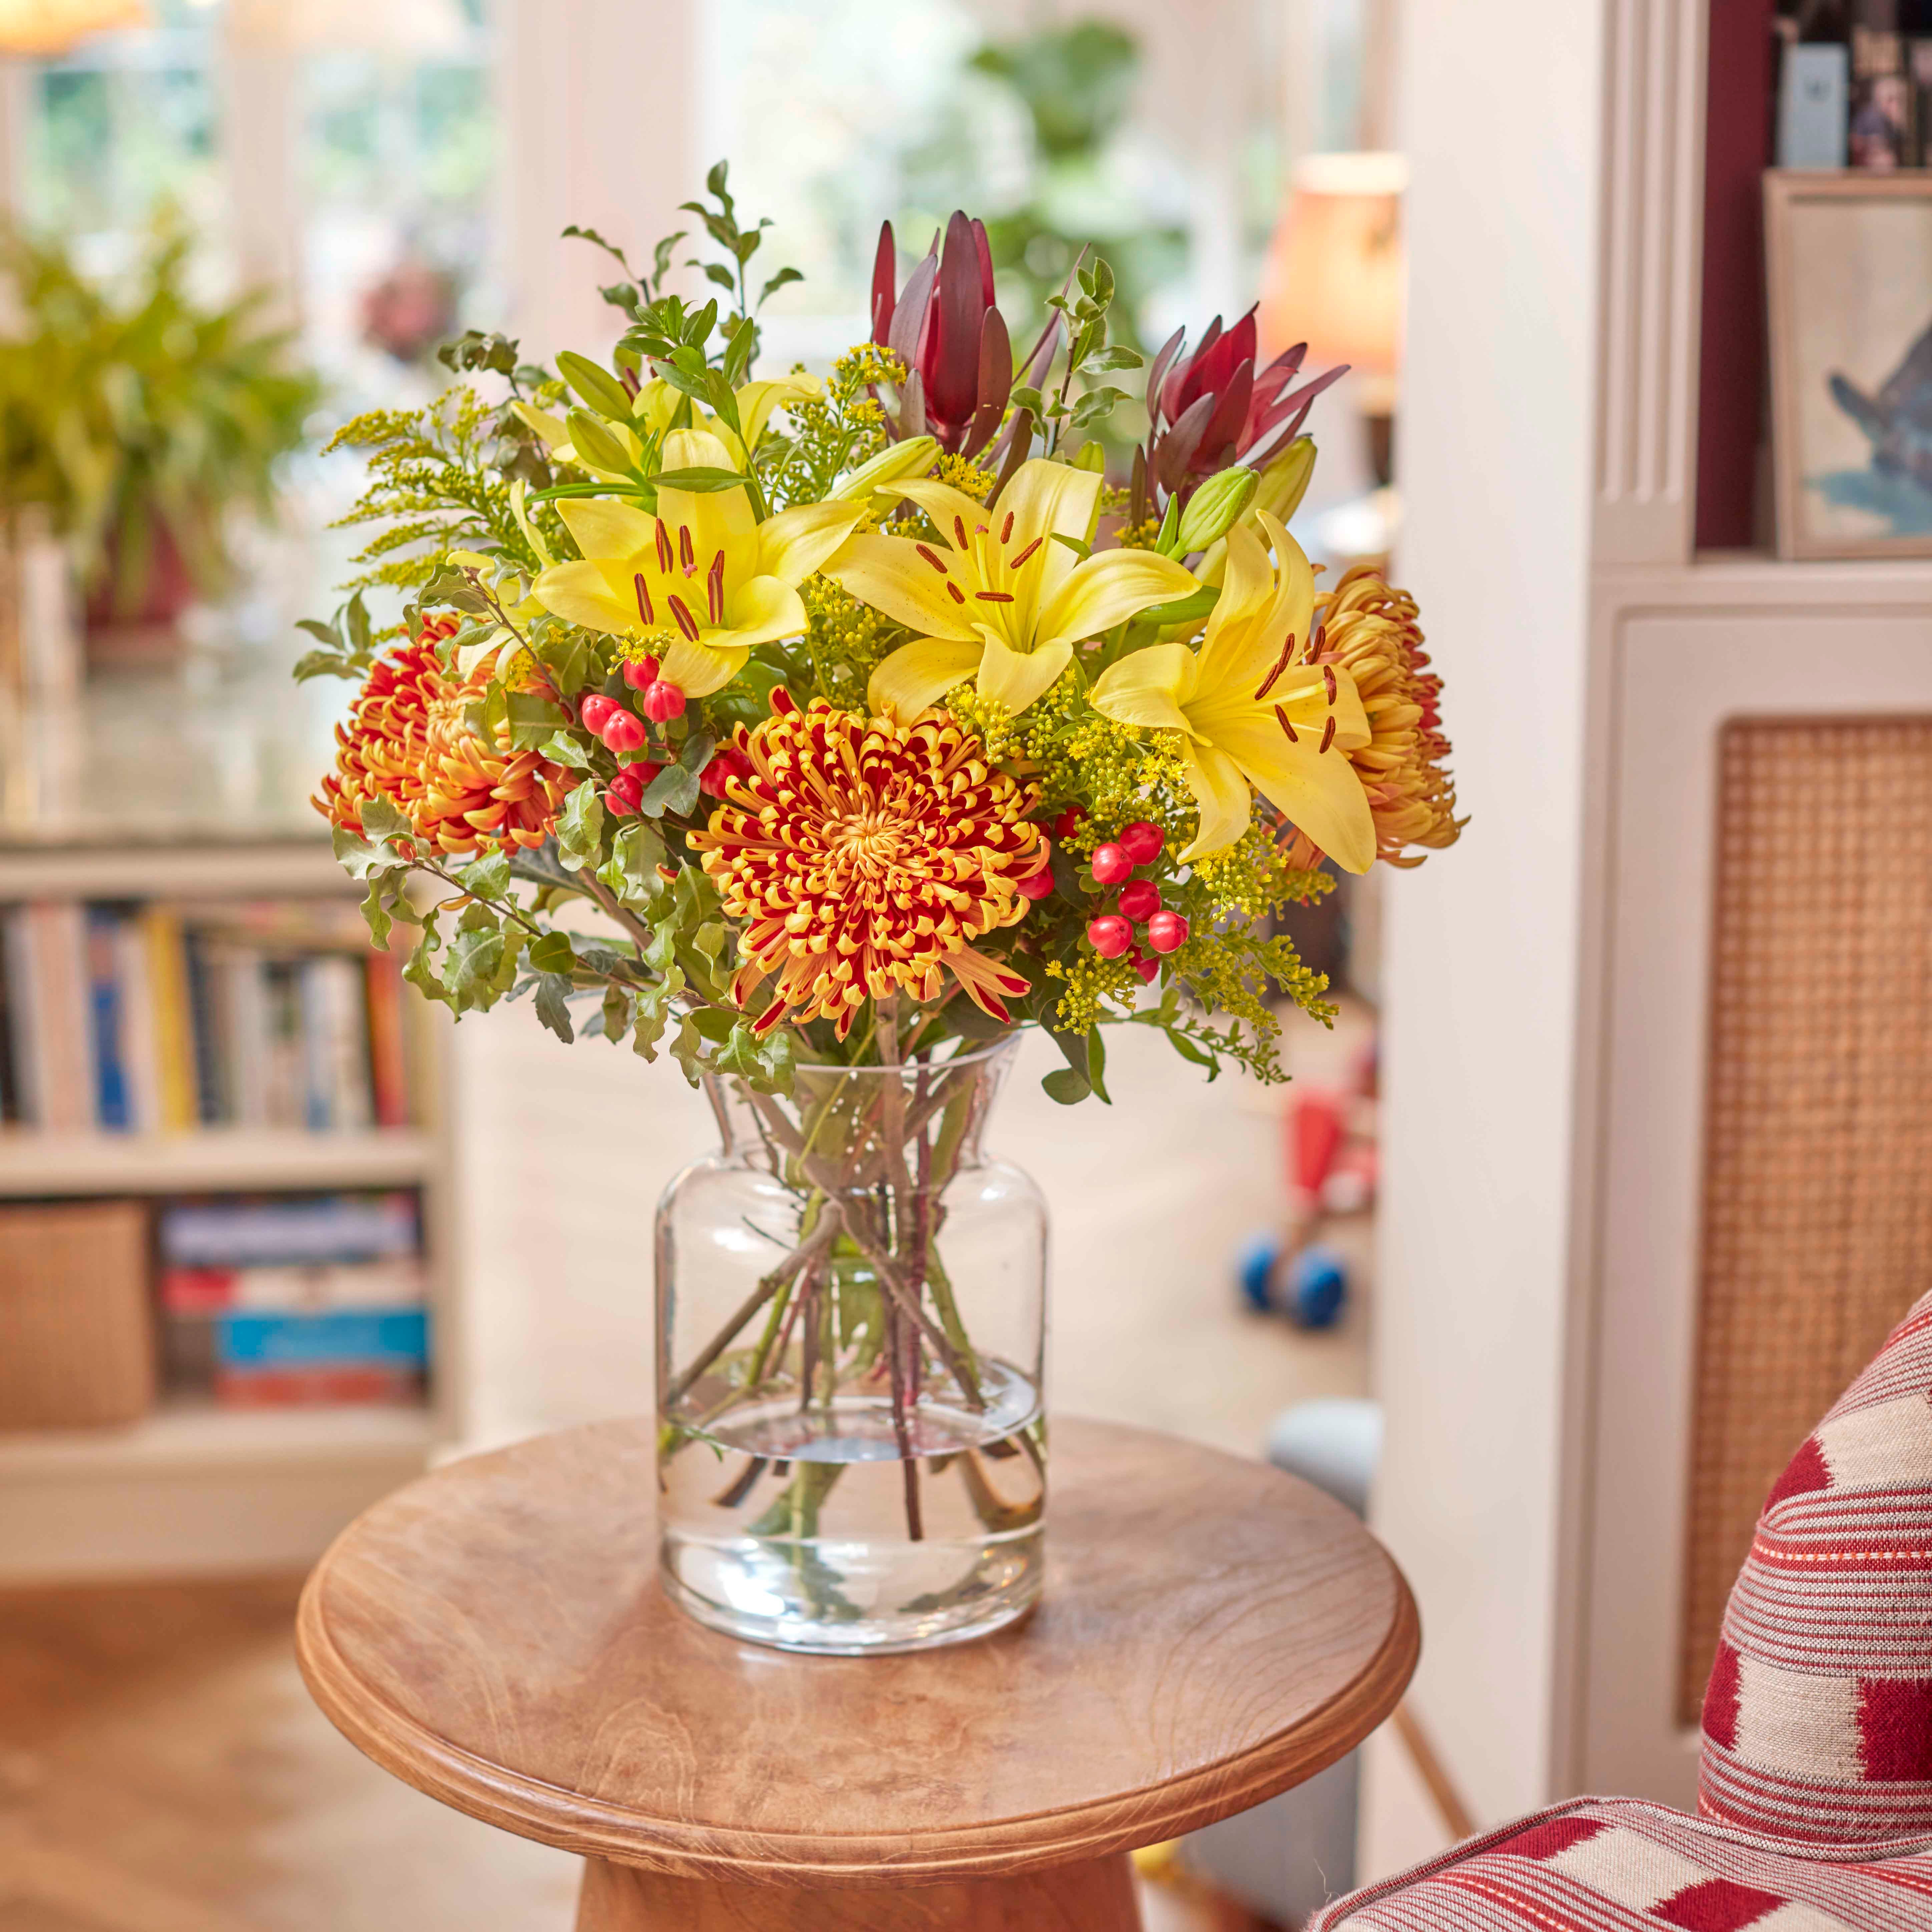 Flowers can be a great way of brightening up your home